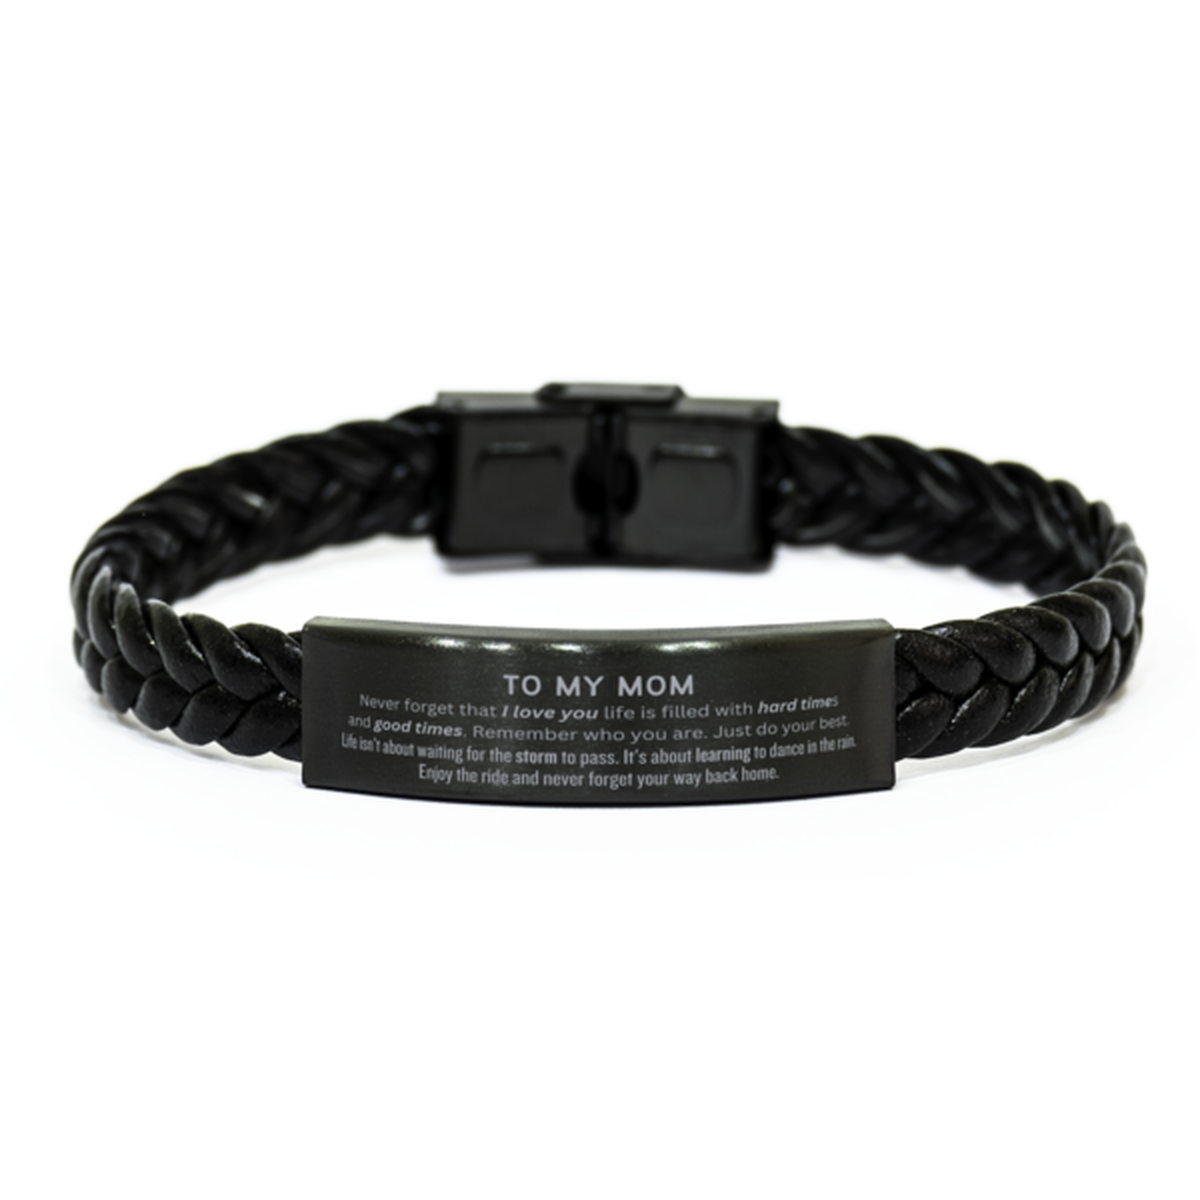 Christmas Mom Braided Leather Bracelet Gifts, To My Mom Birthday Thank You Gifts For Mom, Graduation Unique Gifts For Mom To My Mom Never forget that I love you life is filled with hard times and good times. Remember who you are. Just do your best